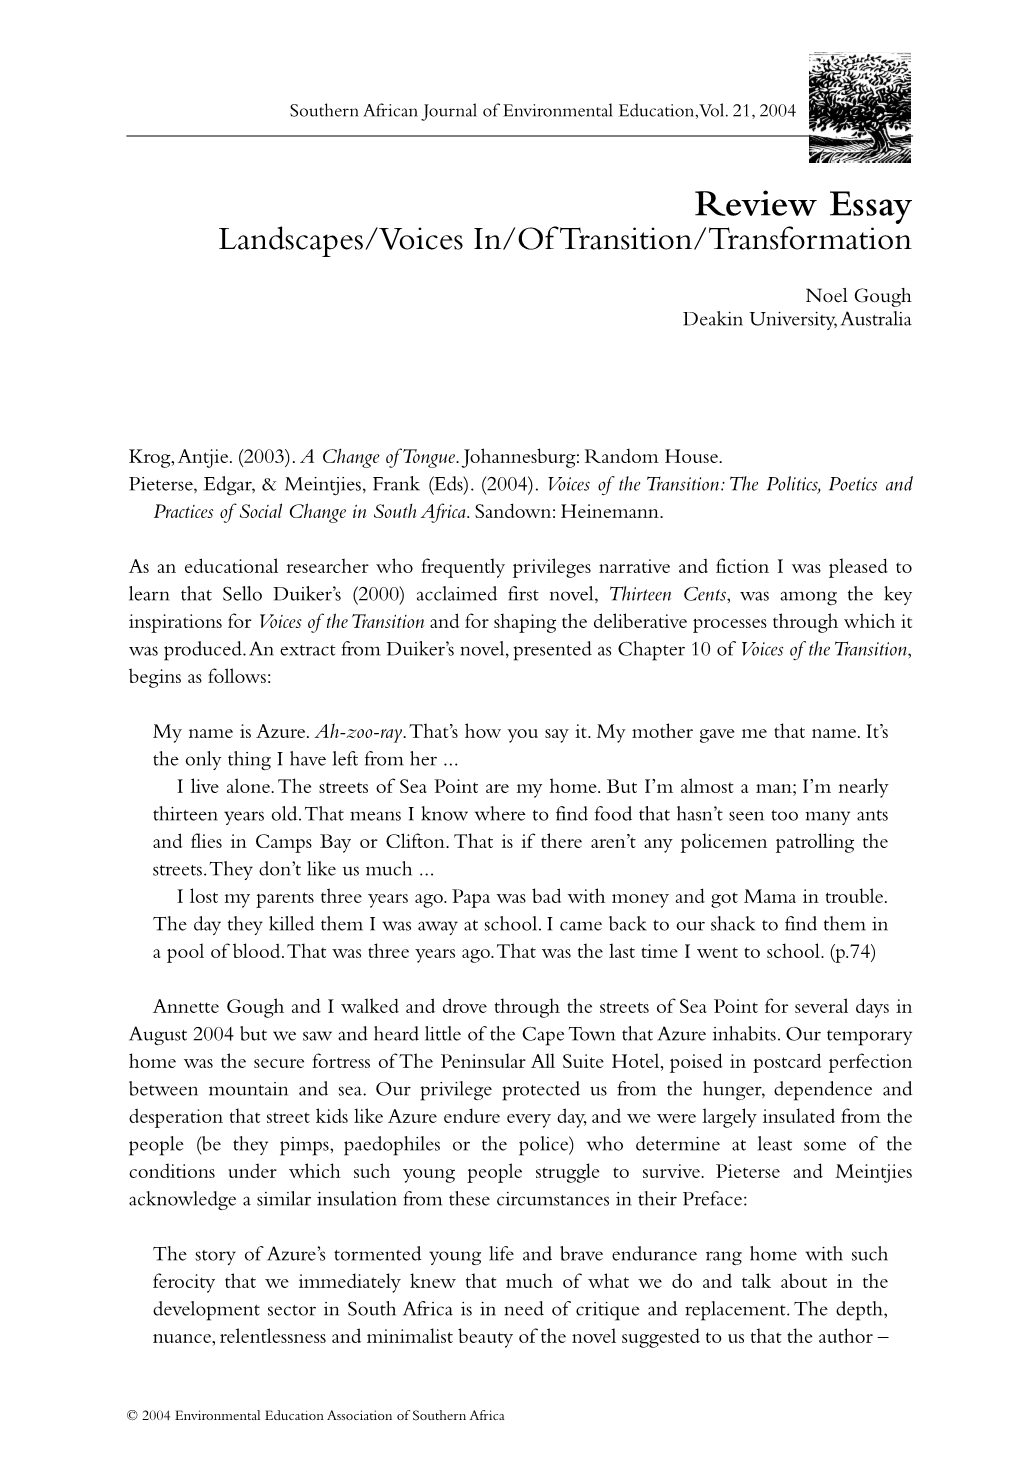 Review Essay Landscapes/Voices In/Of Transition/Transformation